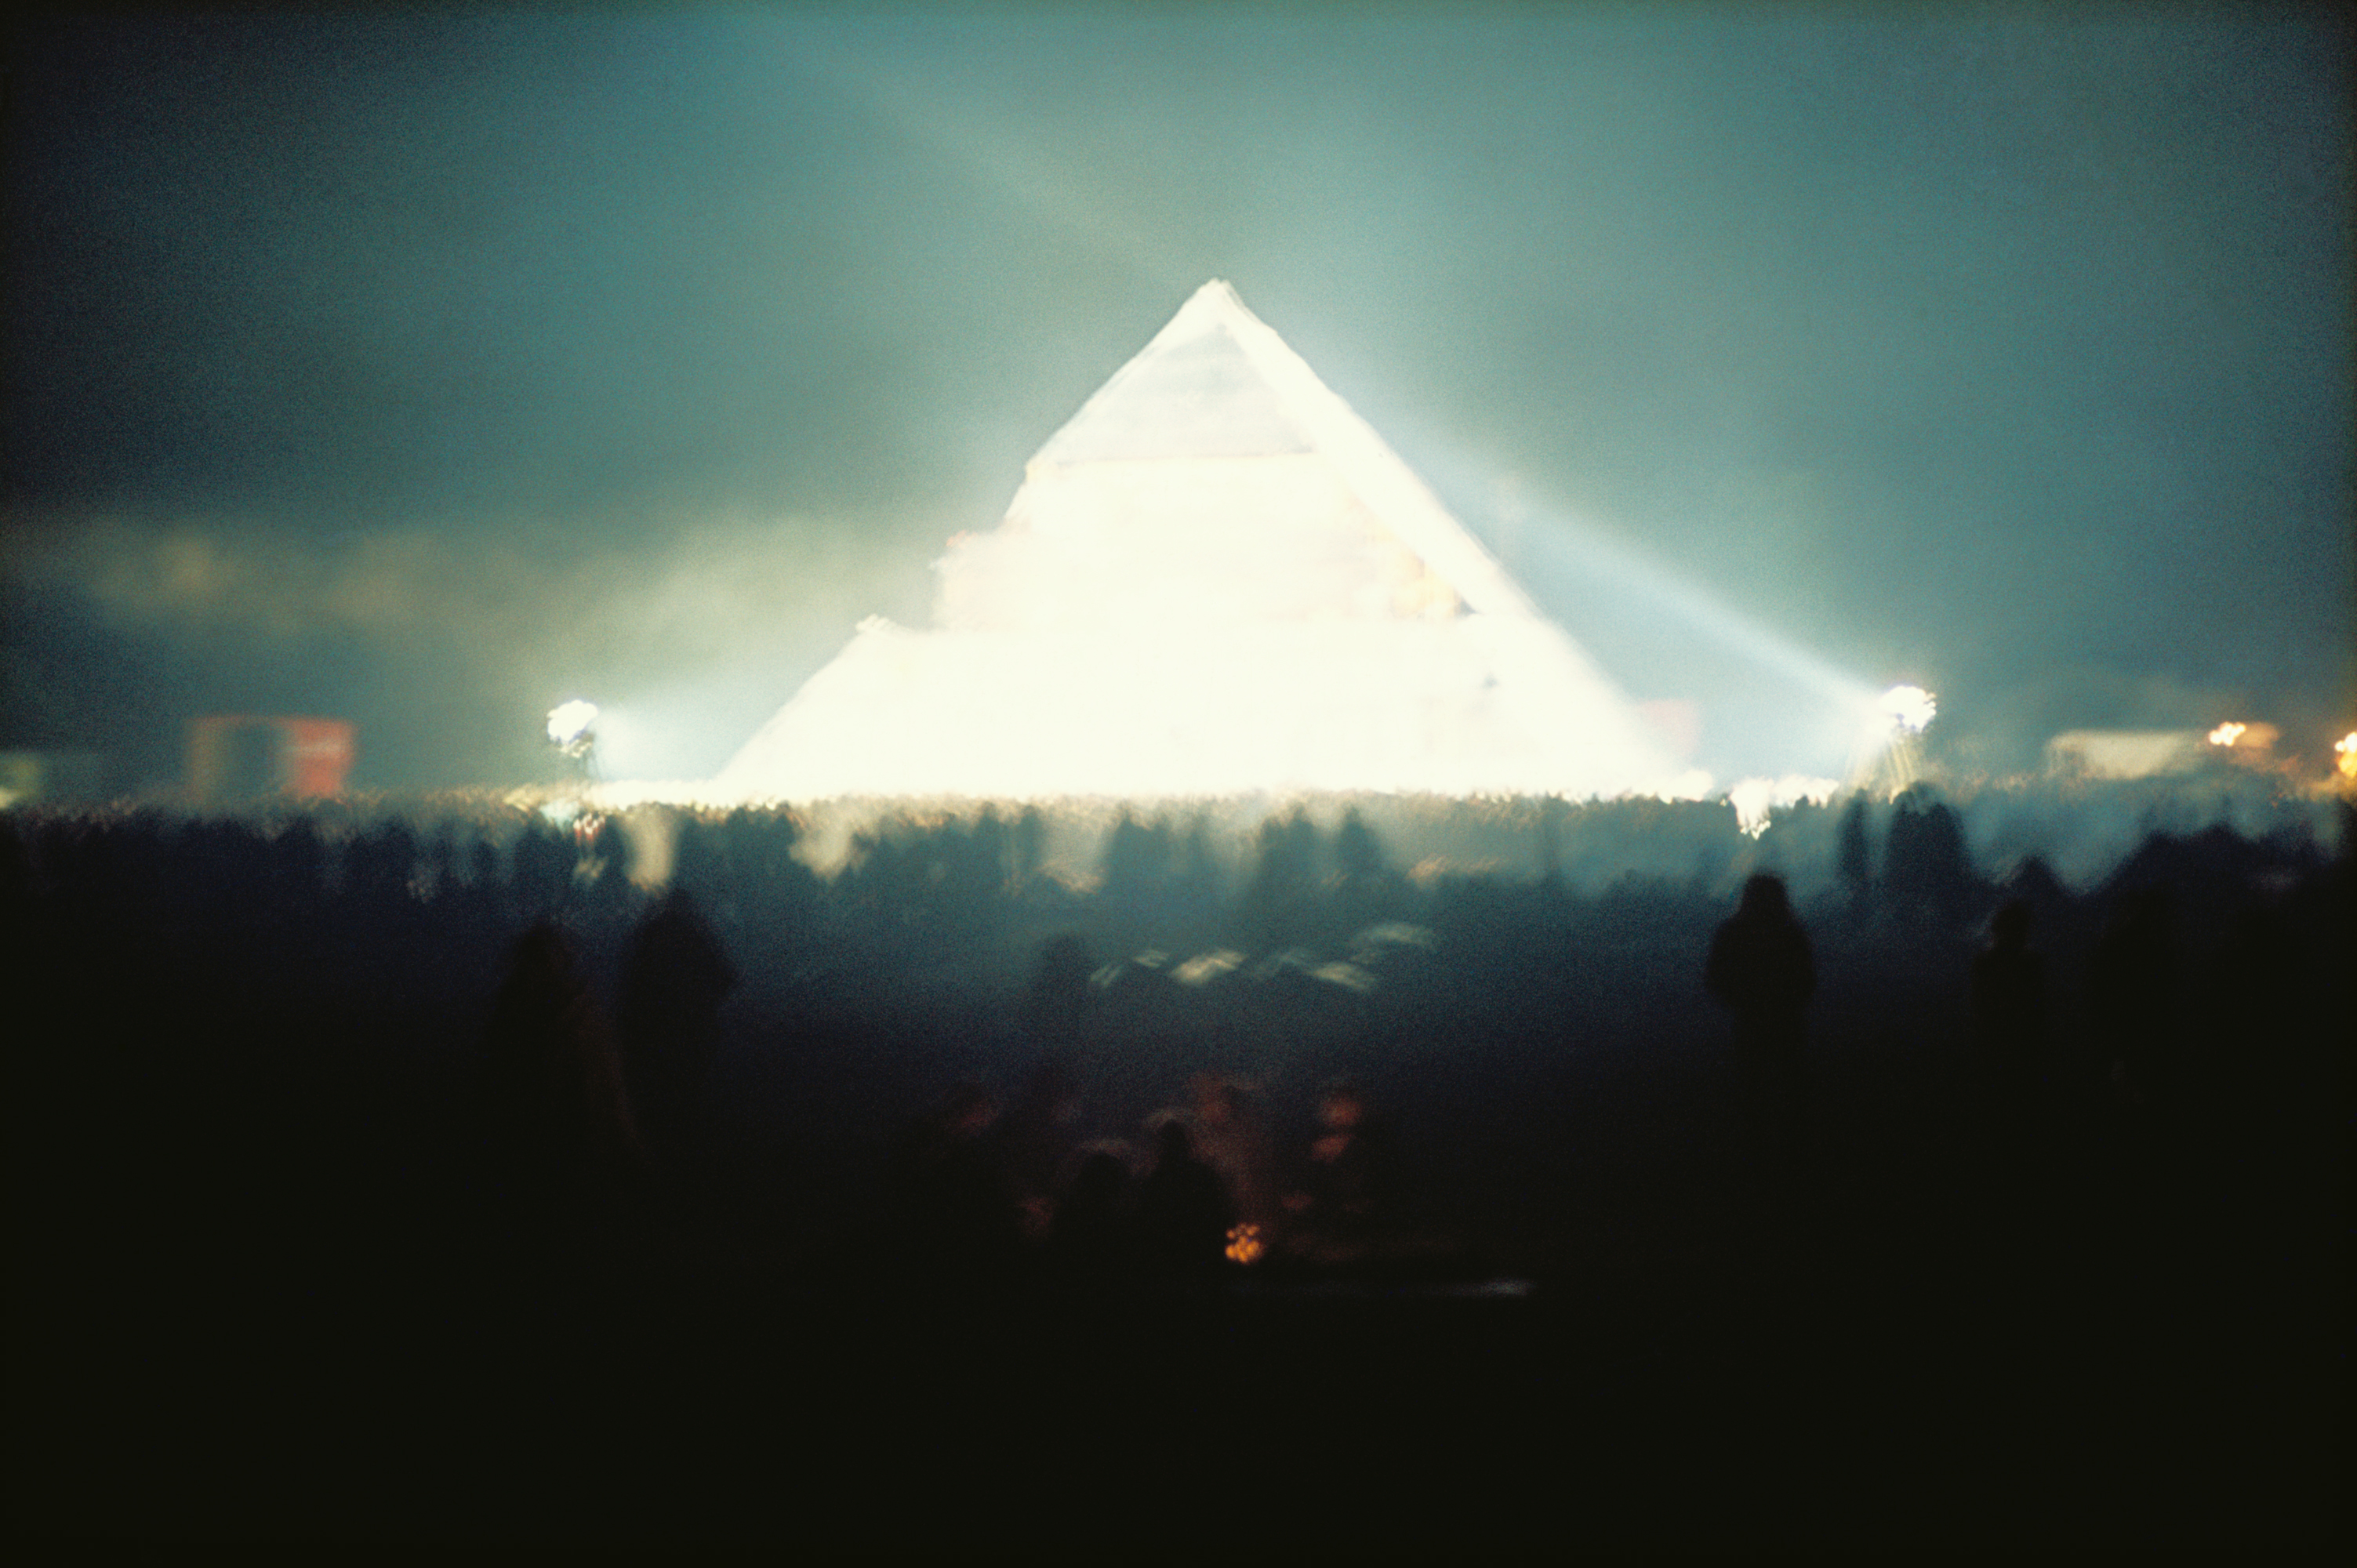 glastonbury's Pyramid Stage lit up at night at the festival in 1971